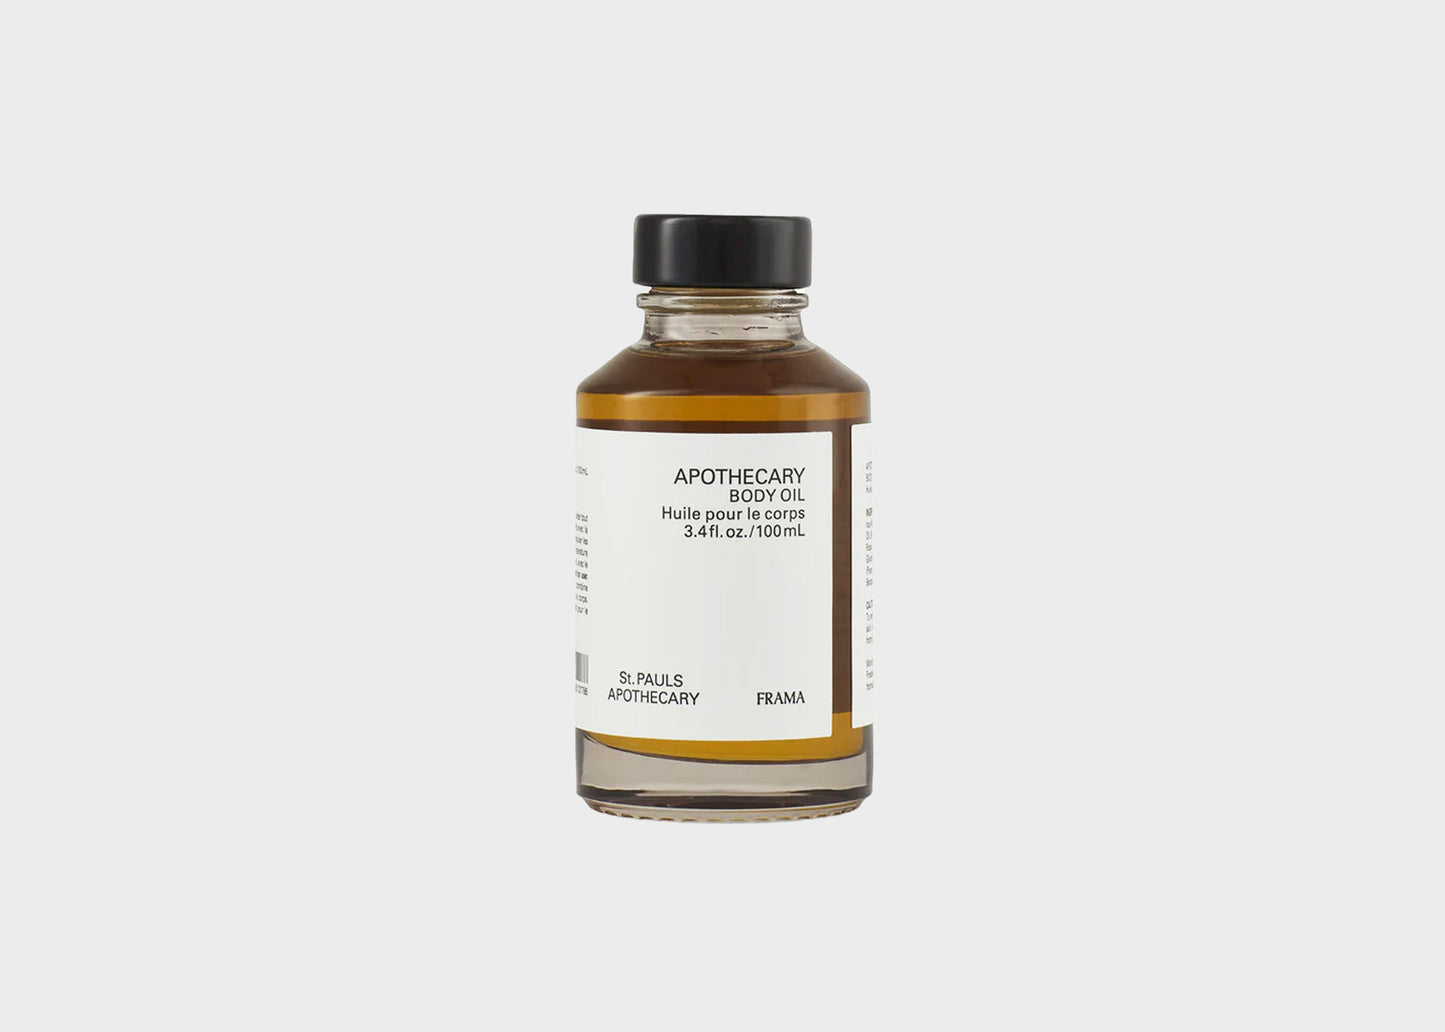 Body Oil Apothecary 100ml by FRAMA